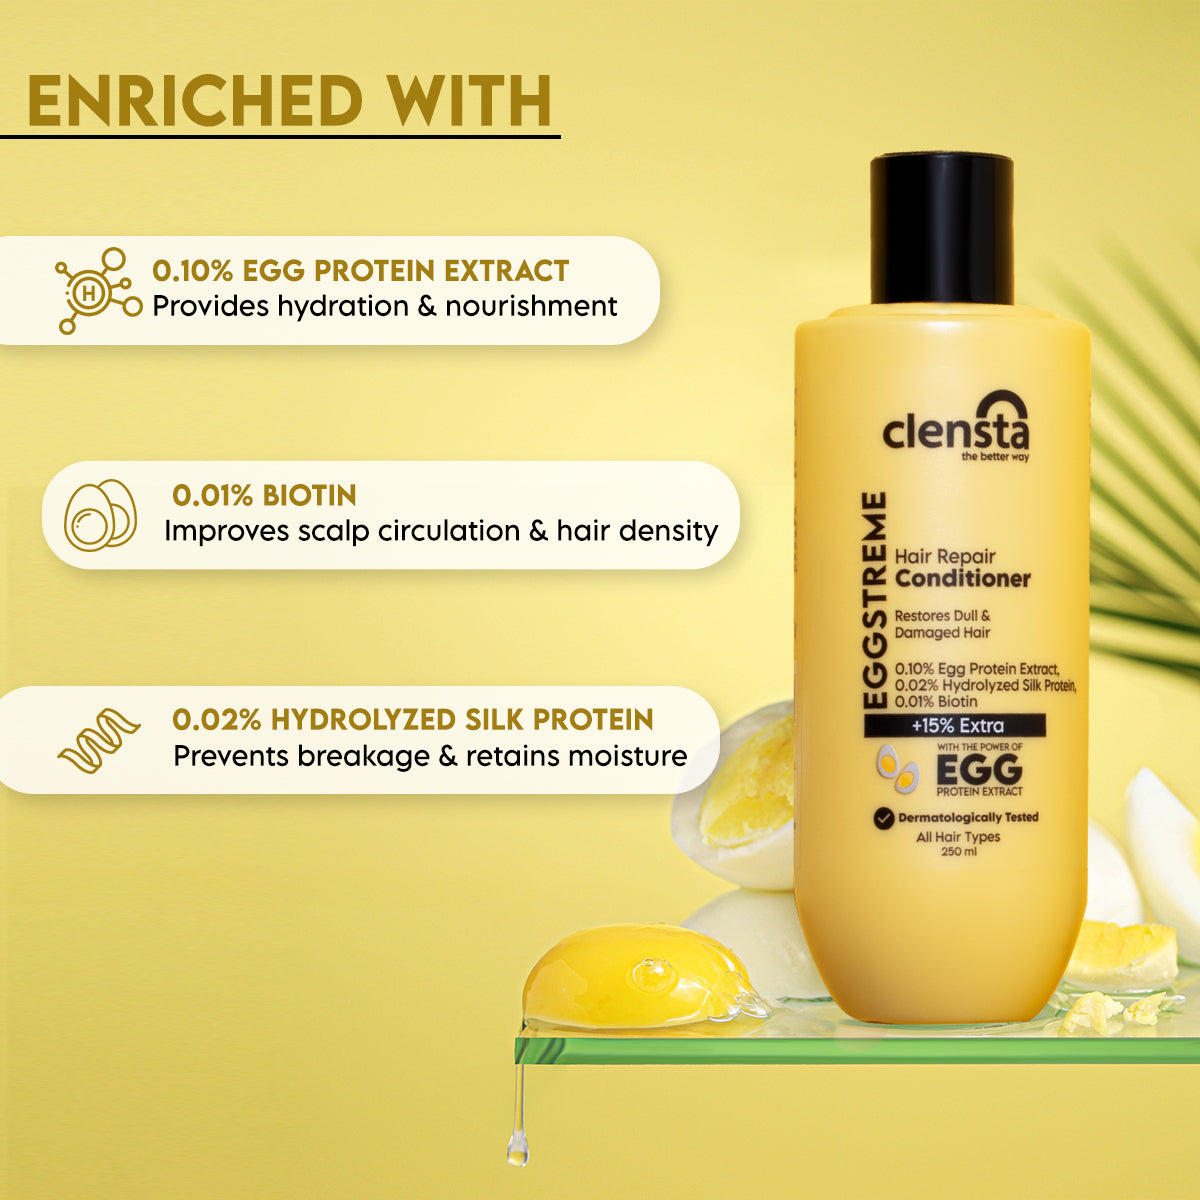 Eggstreme Hair Repair Conditioner with 0.10% Egg Protein Extract, 0.02% Hydrolyzed Silk Protein, 0.01% Biotin